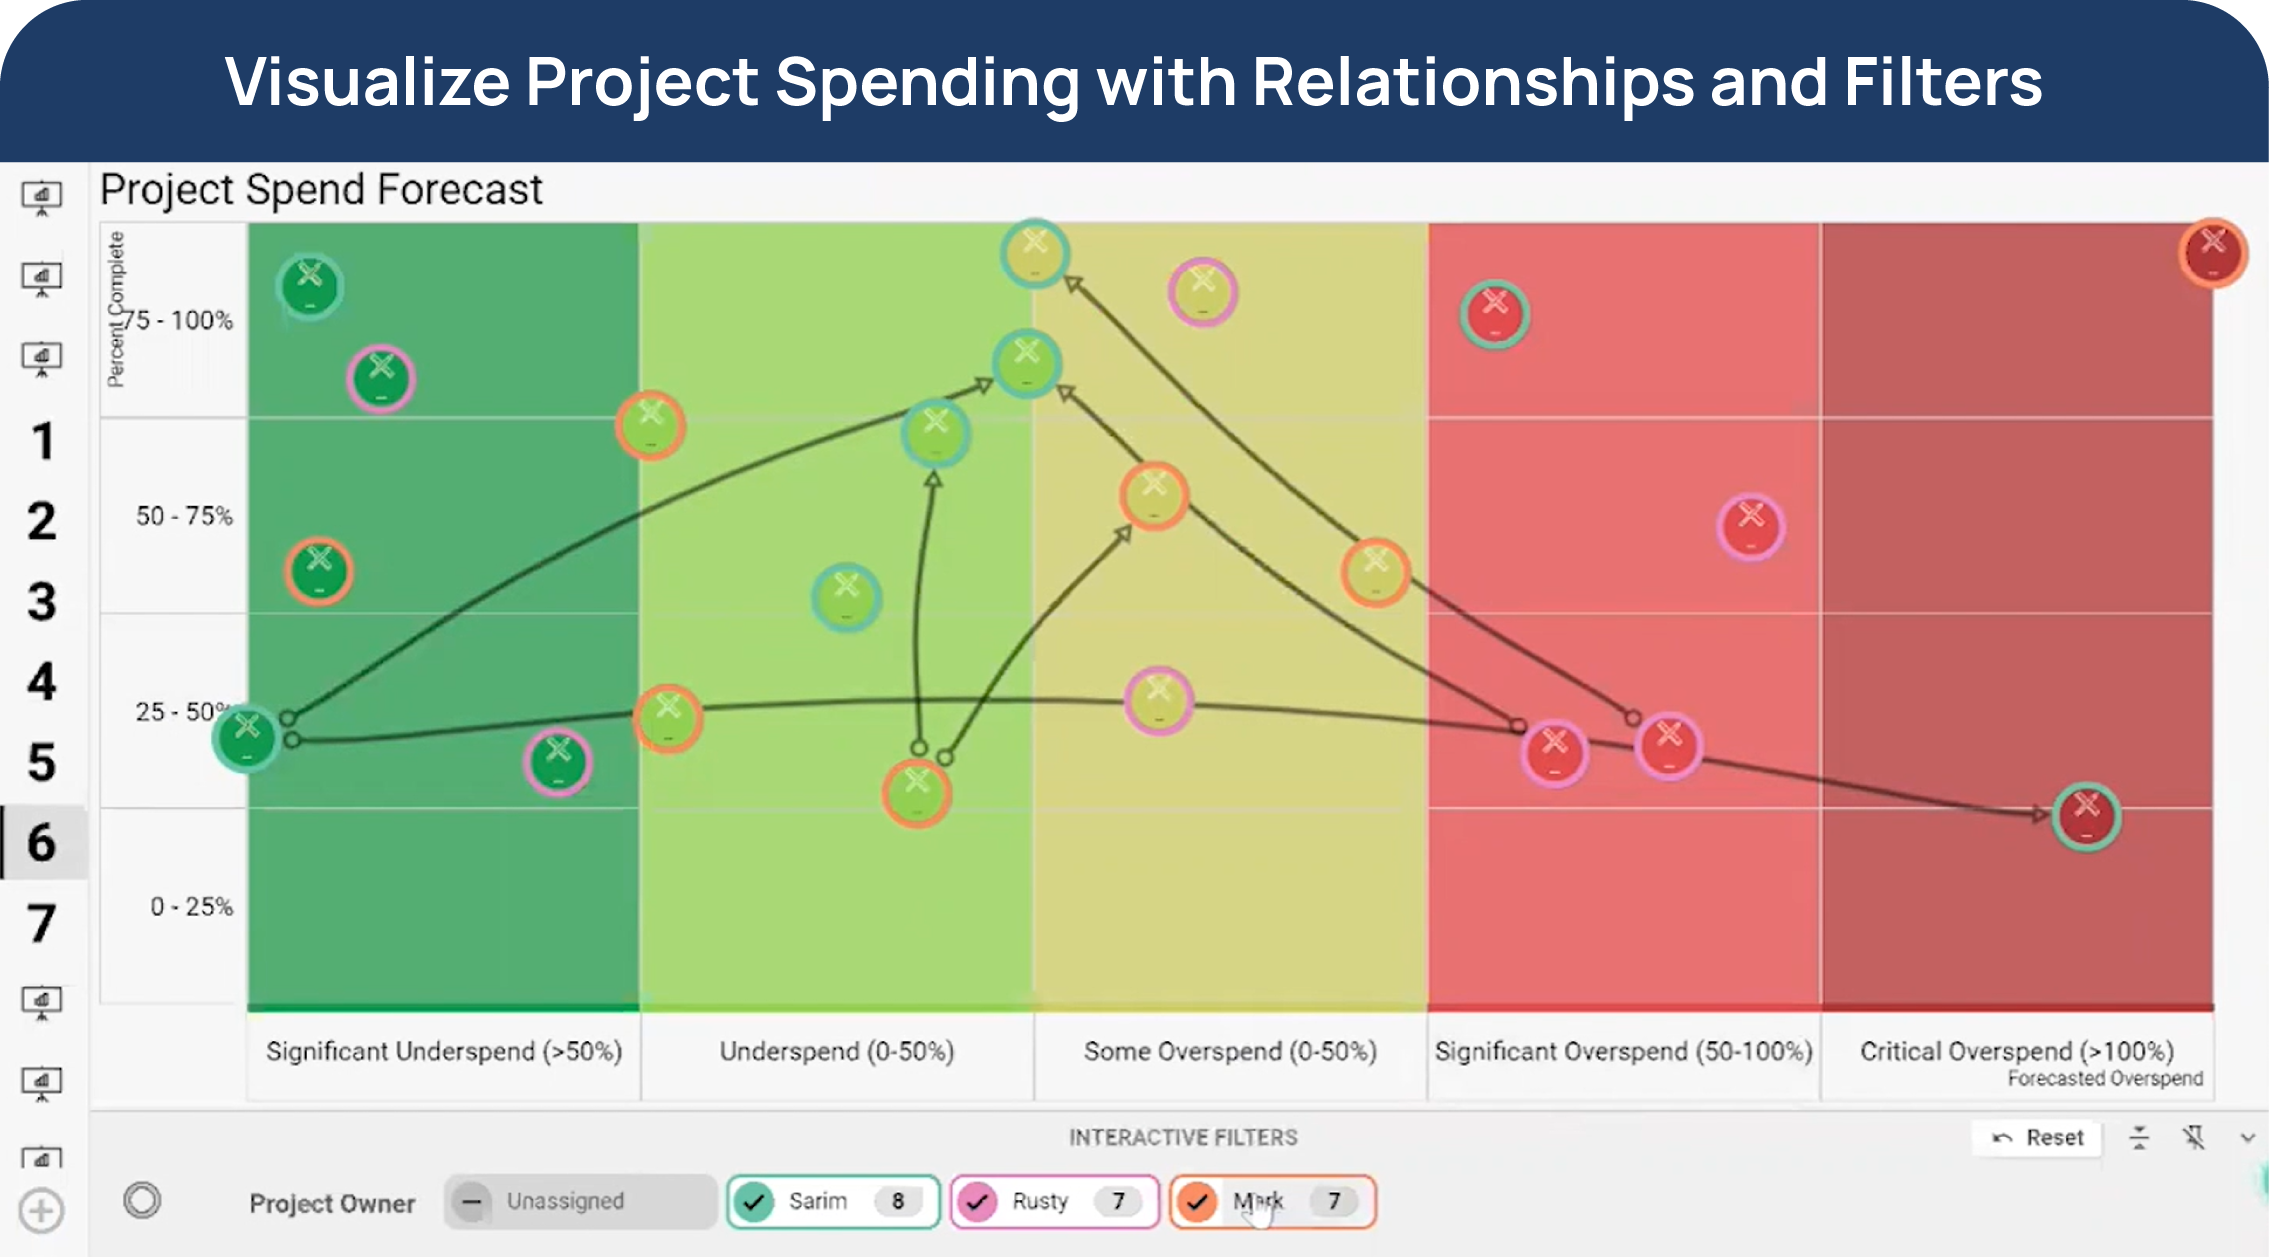 Visualize Project spending with relationships and filters